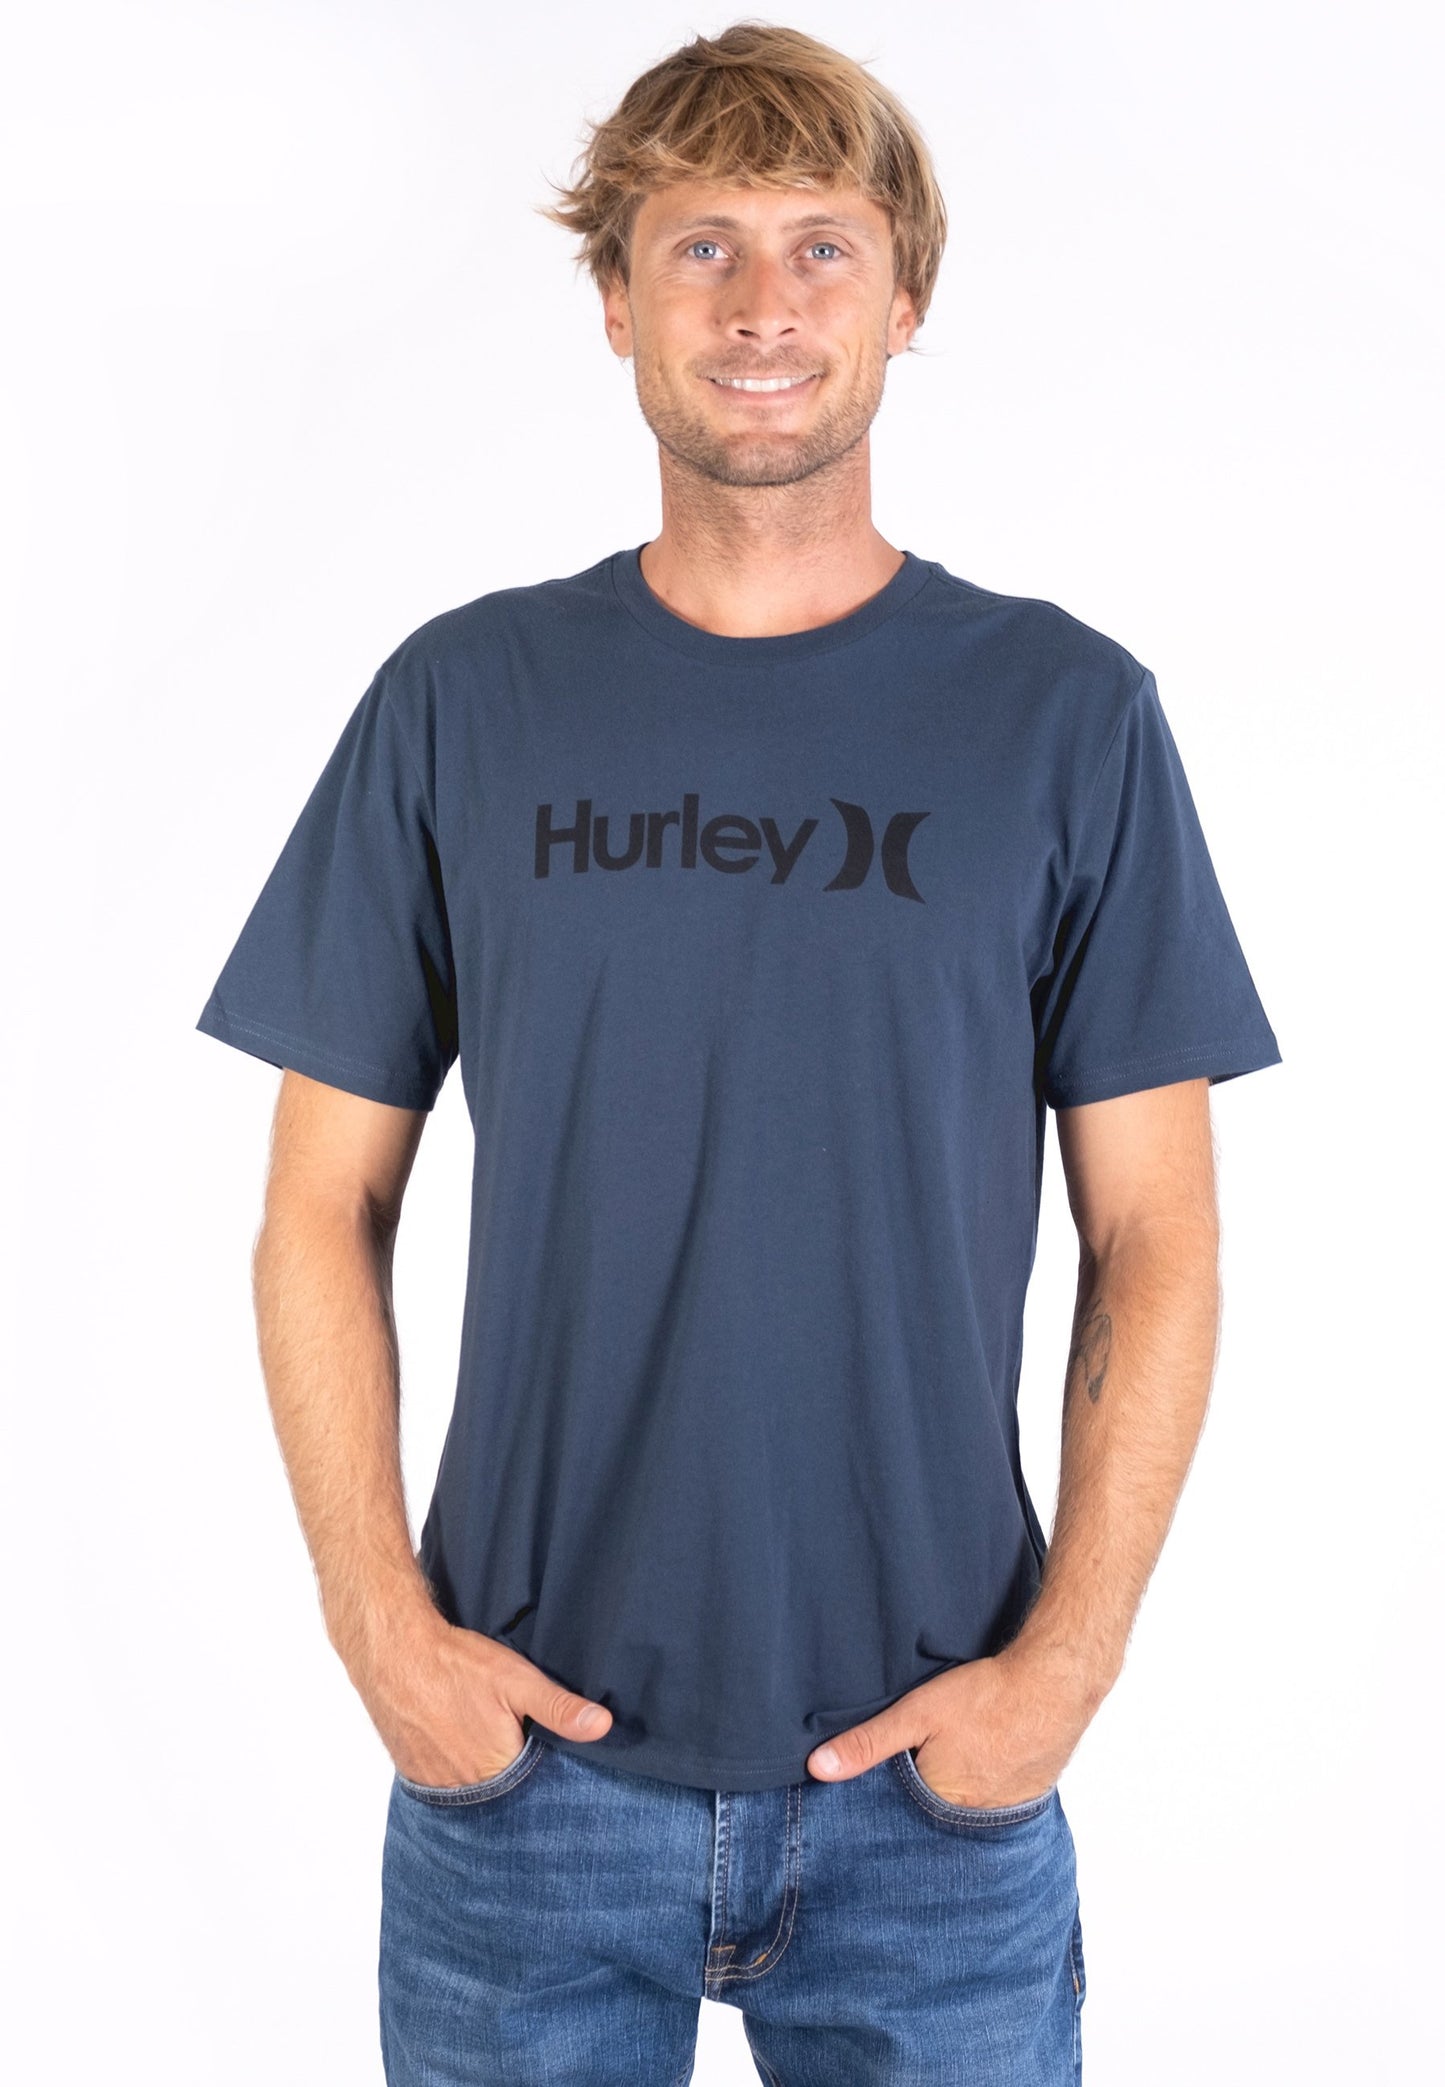 T-SHIRT HURLEY CORE OAO SOLID ARMORY NAVY